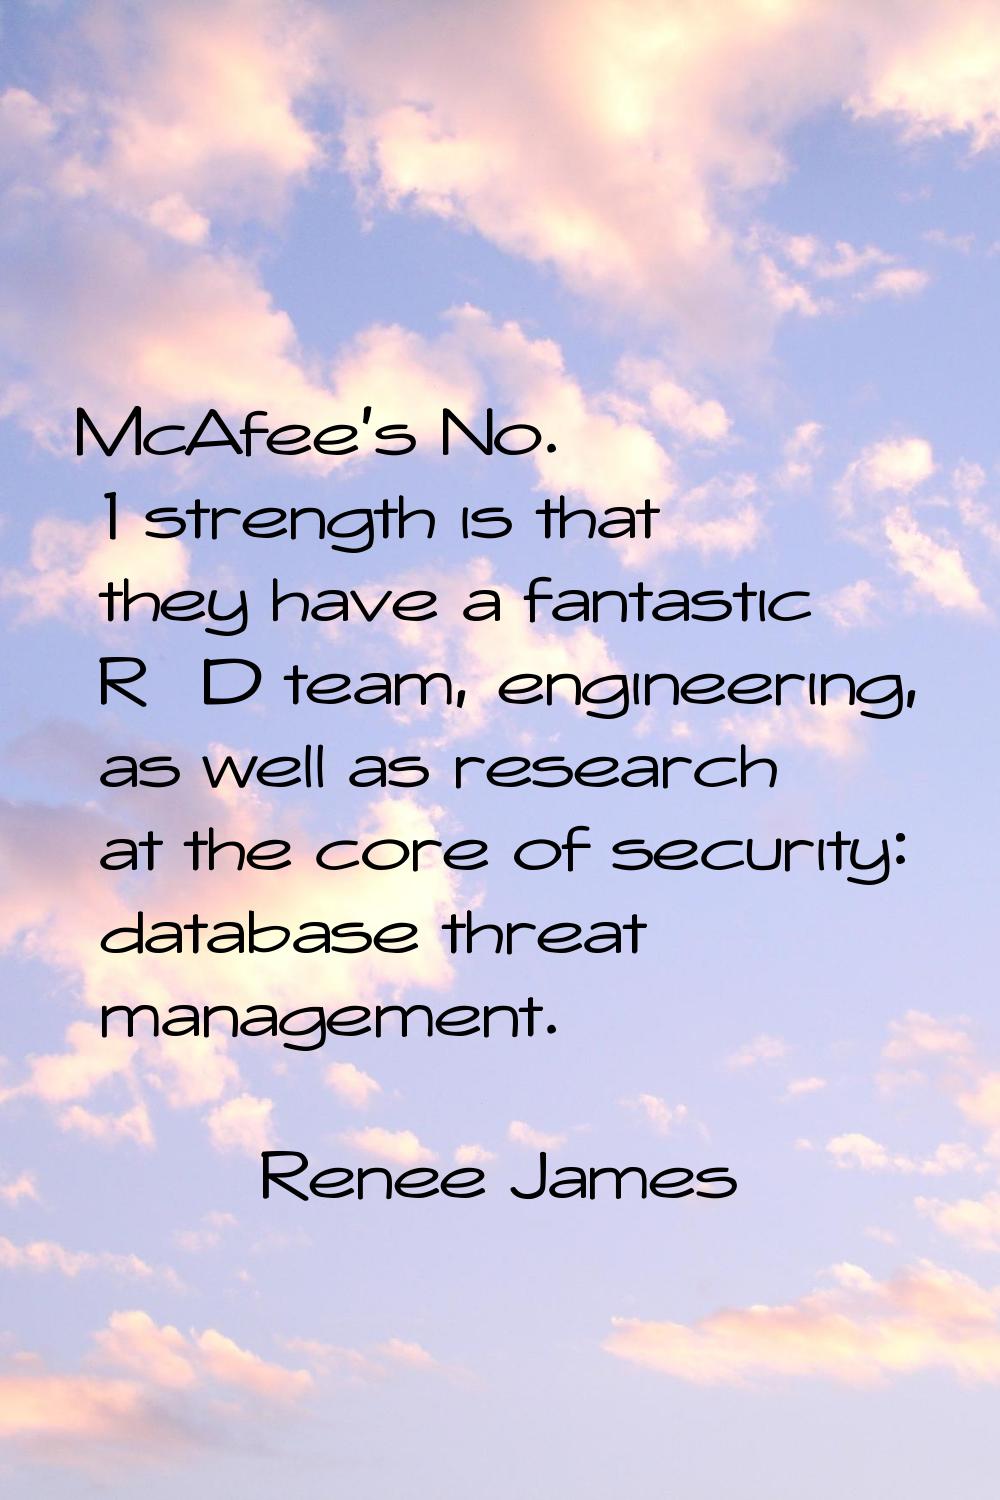 McAfee's No. 1 strength is that they have a fantastic R&D team, engineering, as well as research at